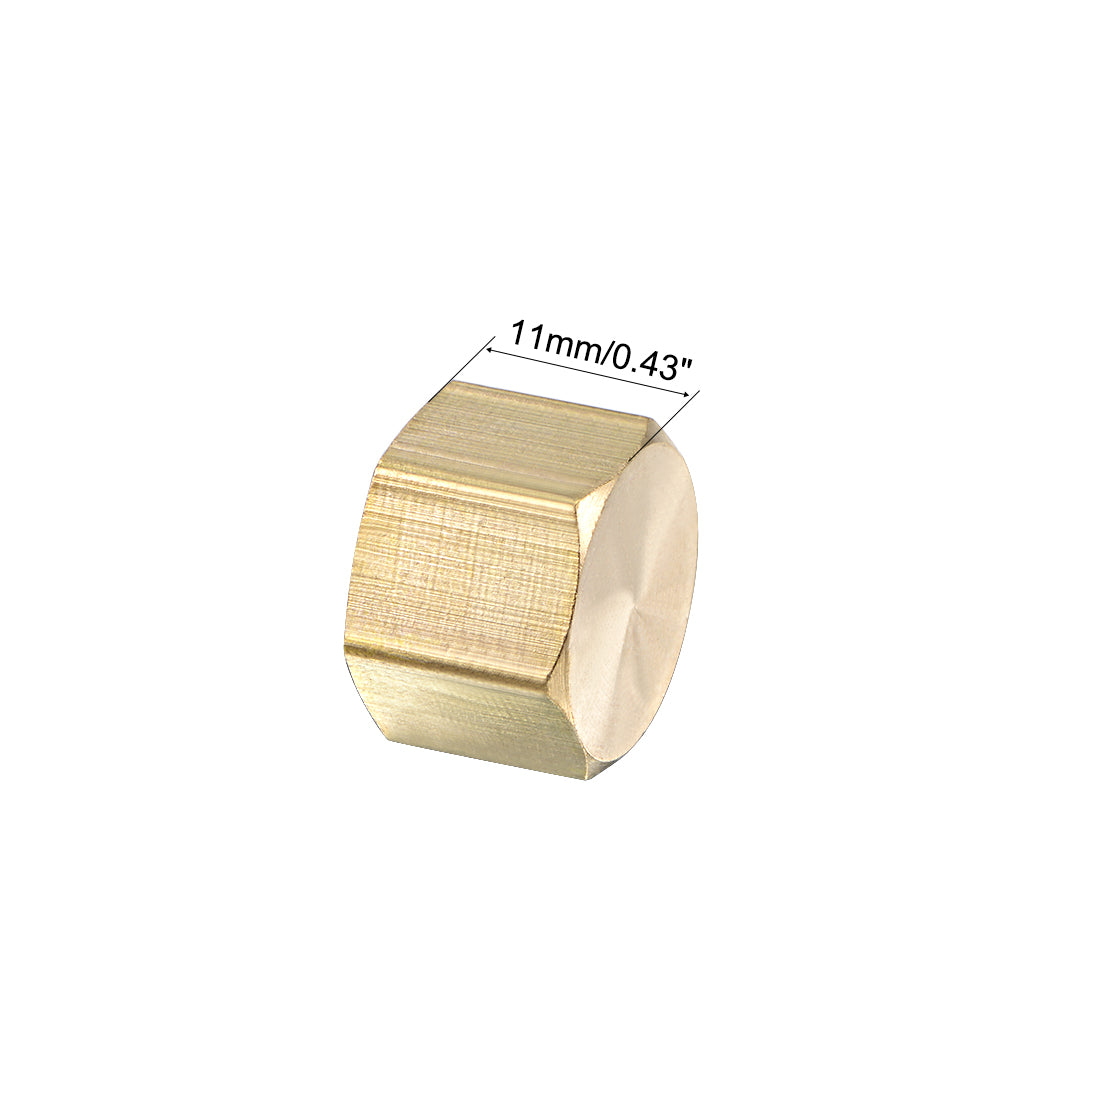 uxcell Uxcell Brass Cap G1/4 Female Pipe Fitting Hex Compression Stop Valve Connector